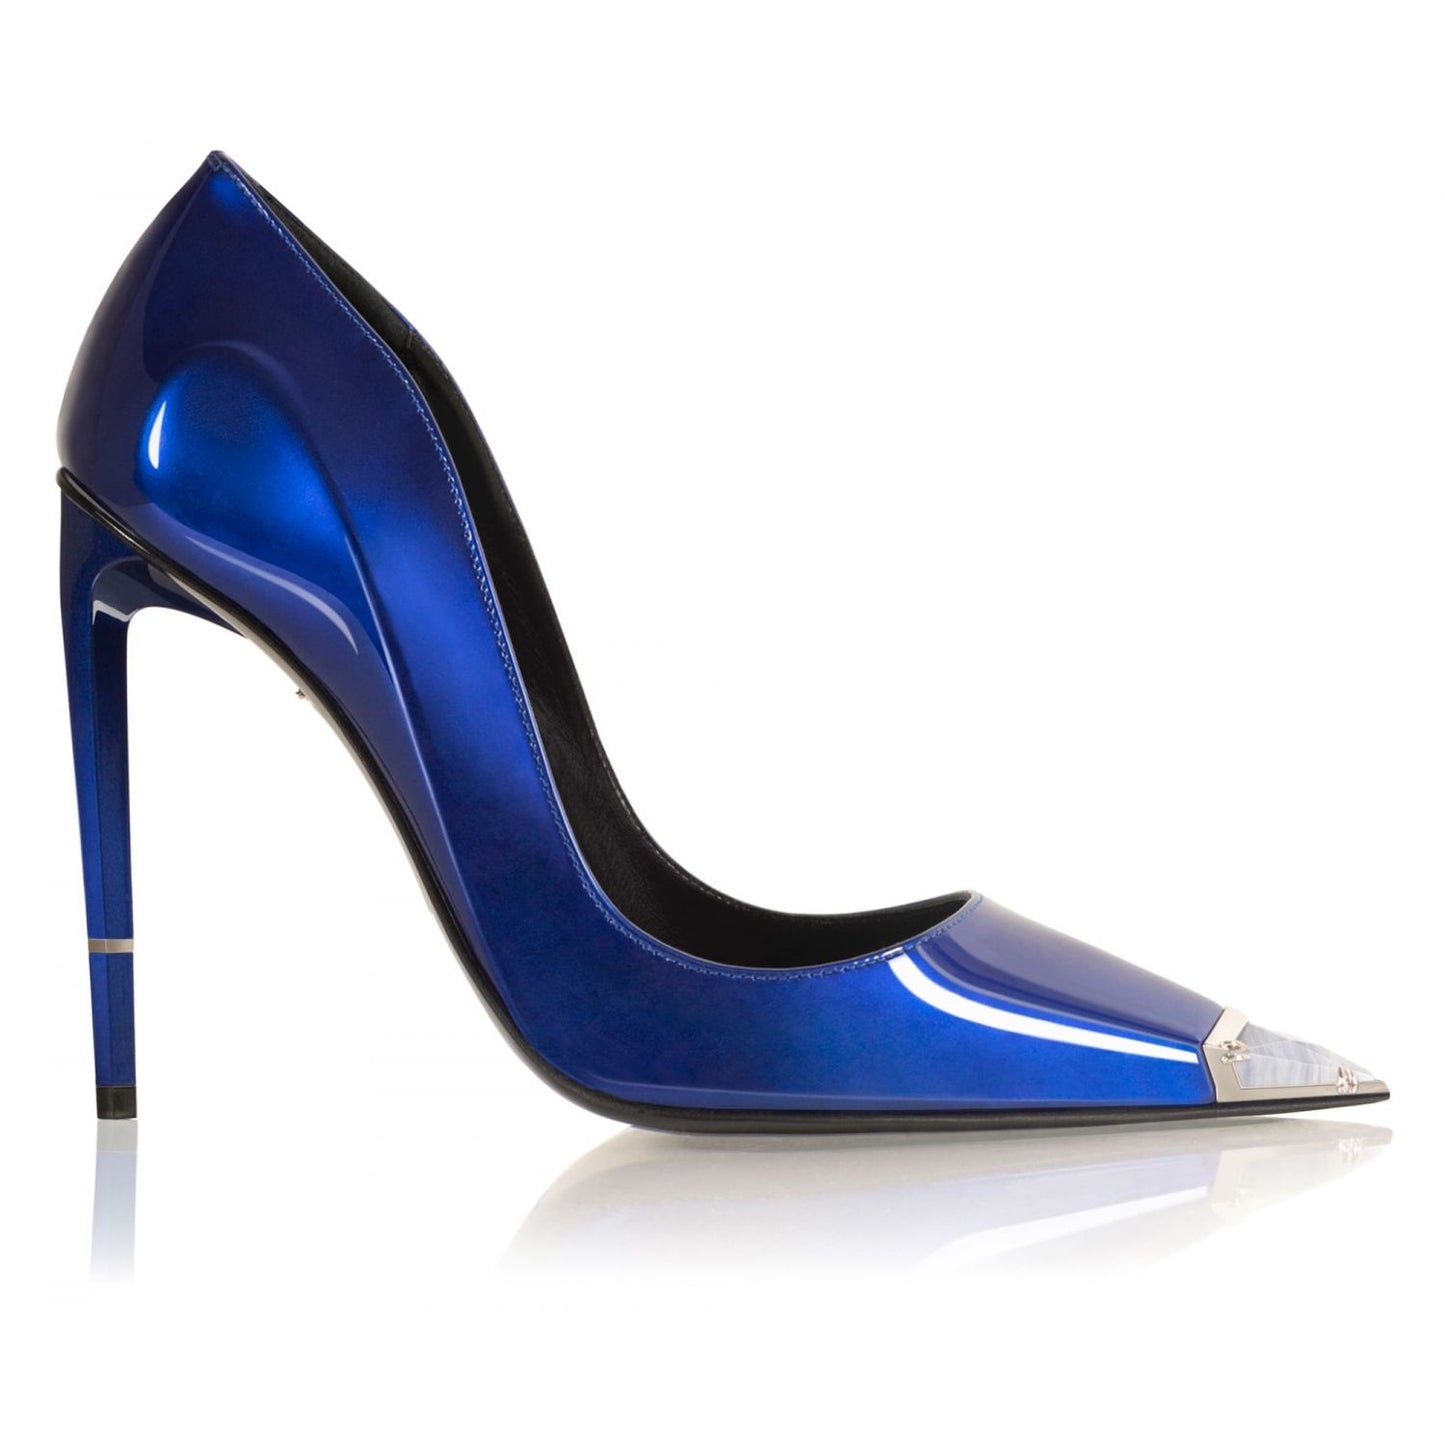 NEPHTHYS IN ELECTRIC BLUE LEATHER